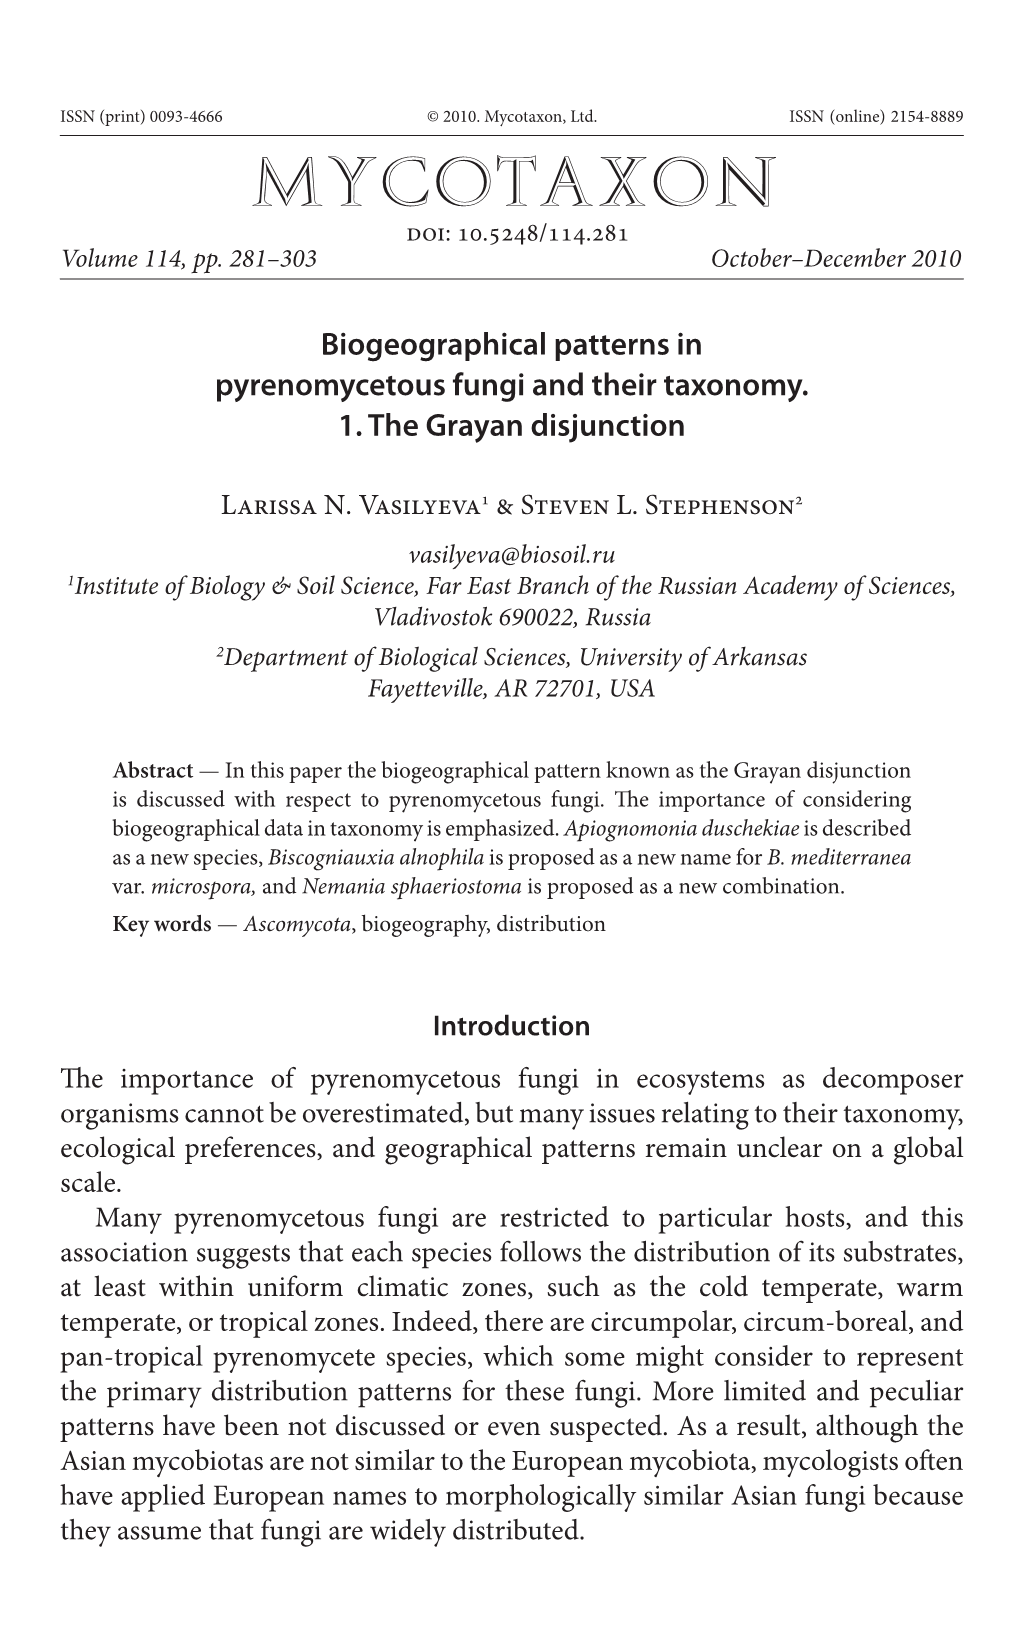 Biogeographical Patterns in Pyrenomycetous Fungi and Their Taxonomy